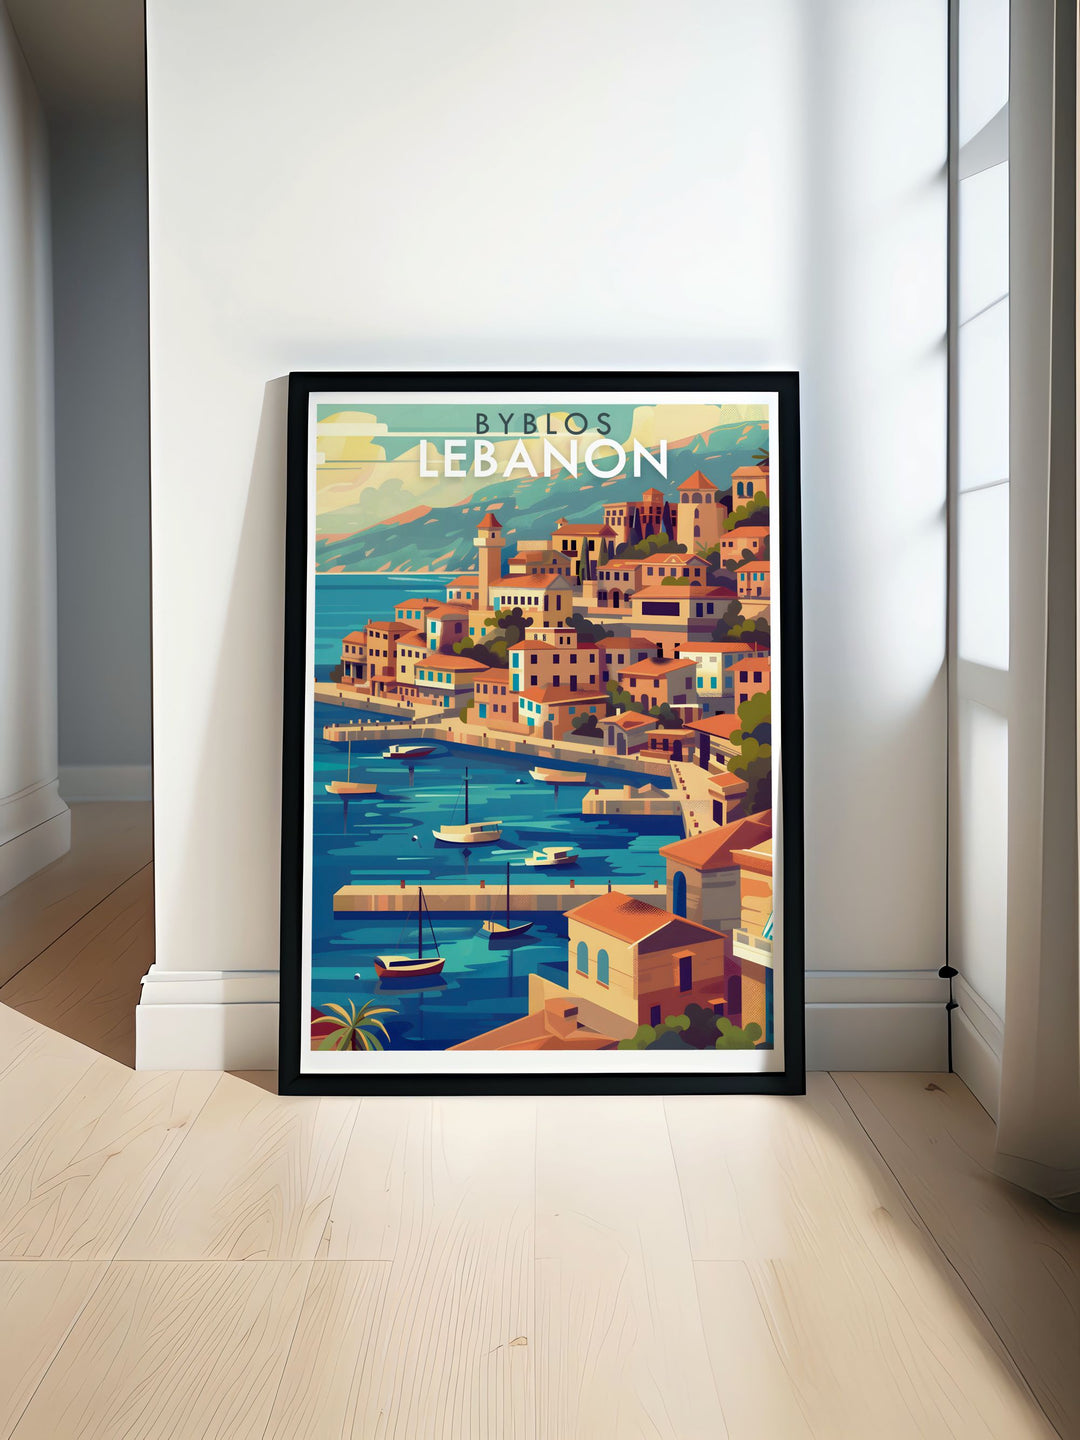 Beirut Print capturing the vibrant cityscape and rich cultural heritage of Lebanon complemented by Byblos vintage print showcasing ancient ruins and Mediterranean beauty perfect for home decor and gifts for travel enthusiasts and art lovers